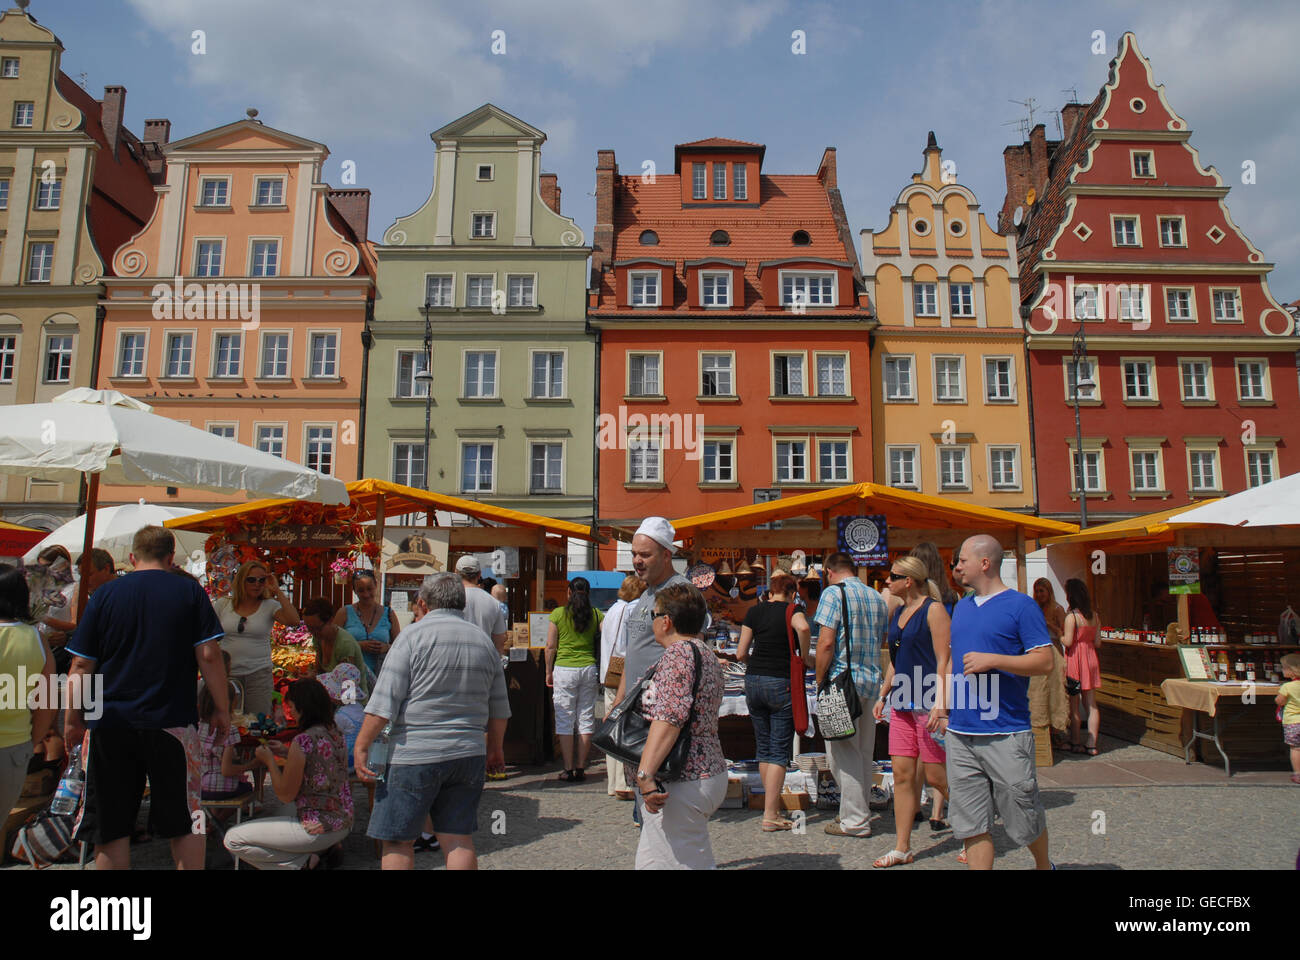 Local produce and crafts market, Solny Square, Wroclaw, Silesia, Poland. Stock Photo